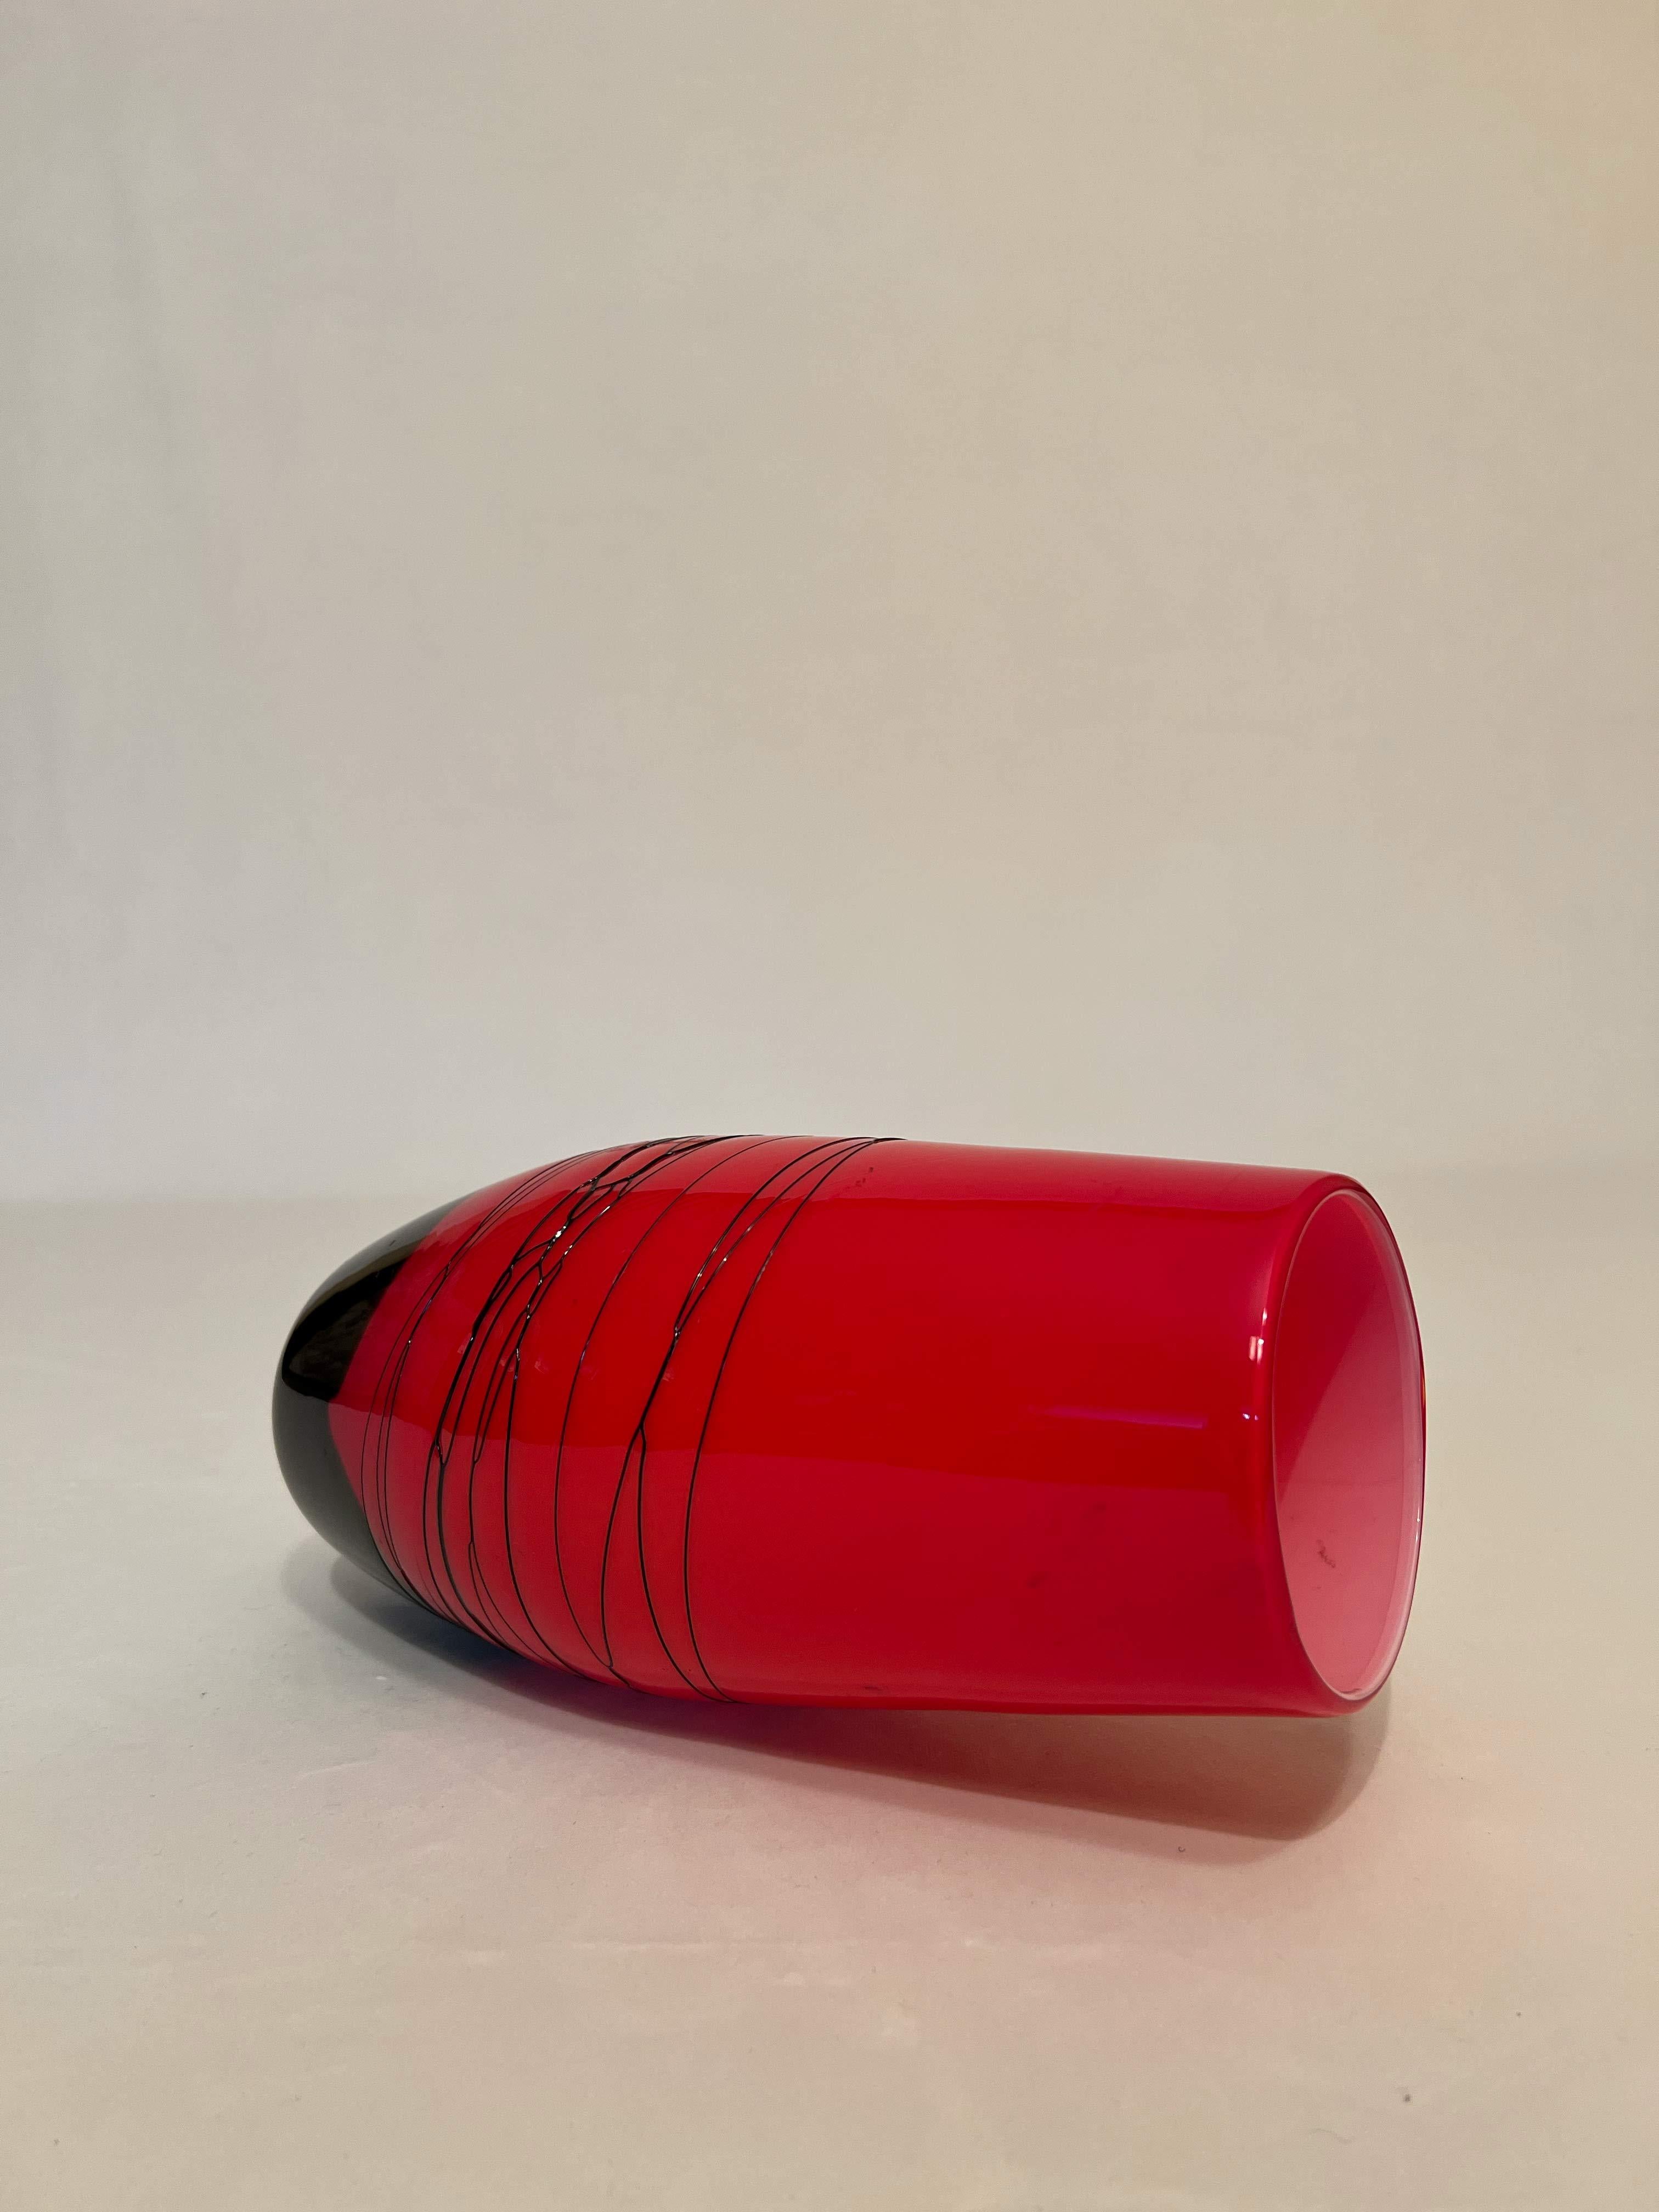 Vase in carmine red glass and black resin from the 1980s from the personal collection of a Sicilian family. Vase in bright tones suitable for any environment to enrich, and warm, the rooms of your home. 

Gaetano Pesce studied architecture at the